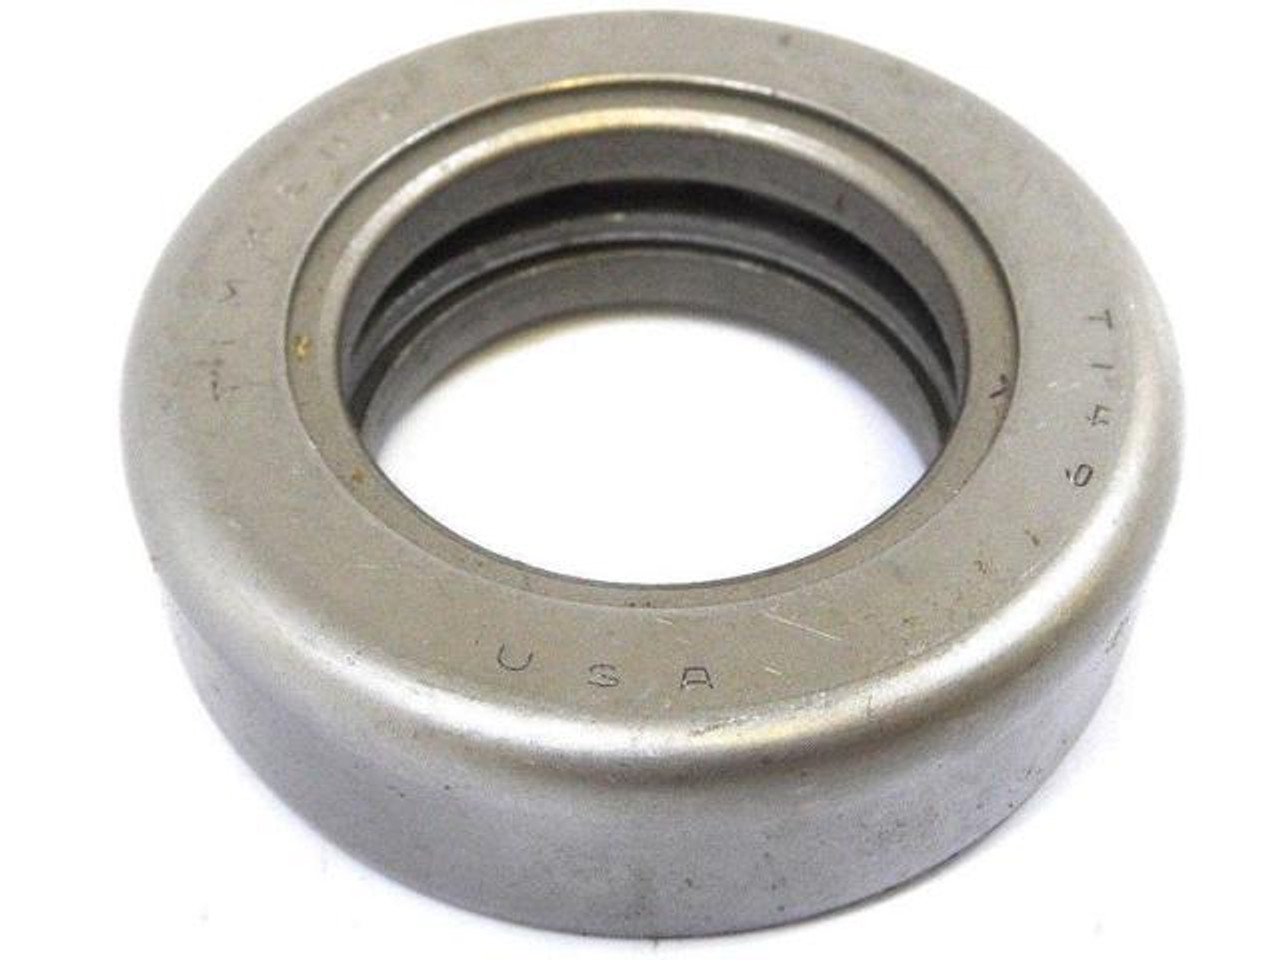 Timken® Stamped Race Thrust Bearing  T199-904A1